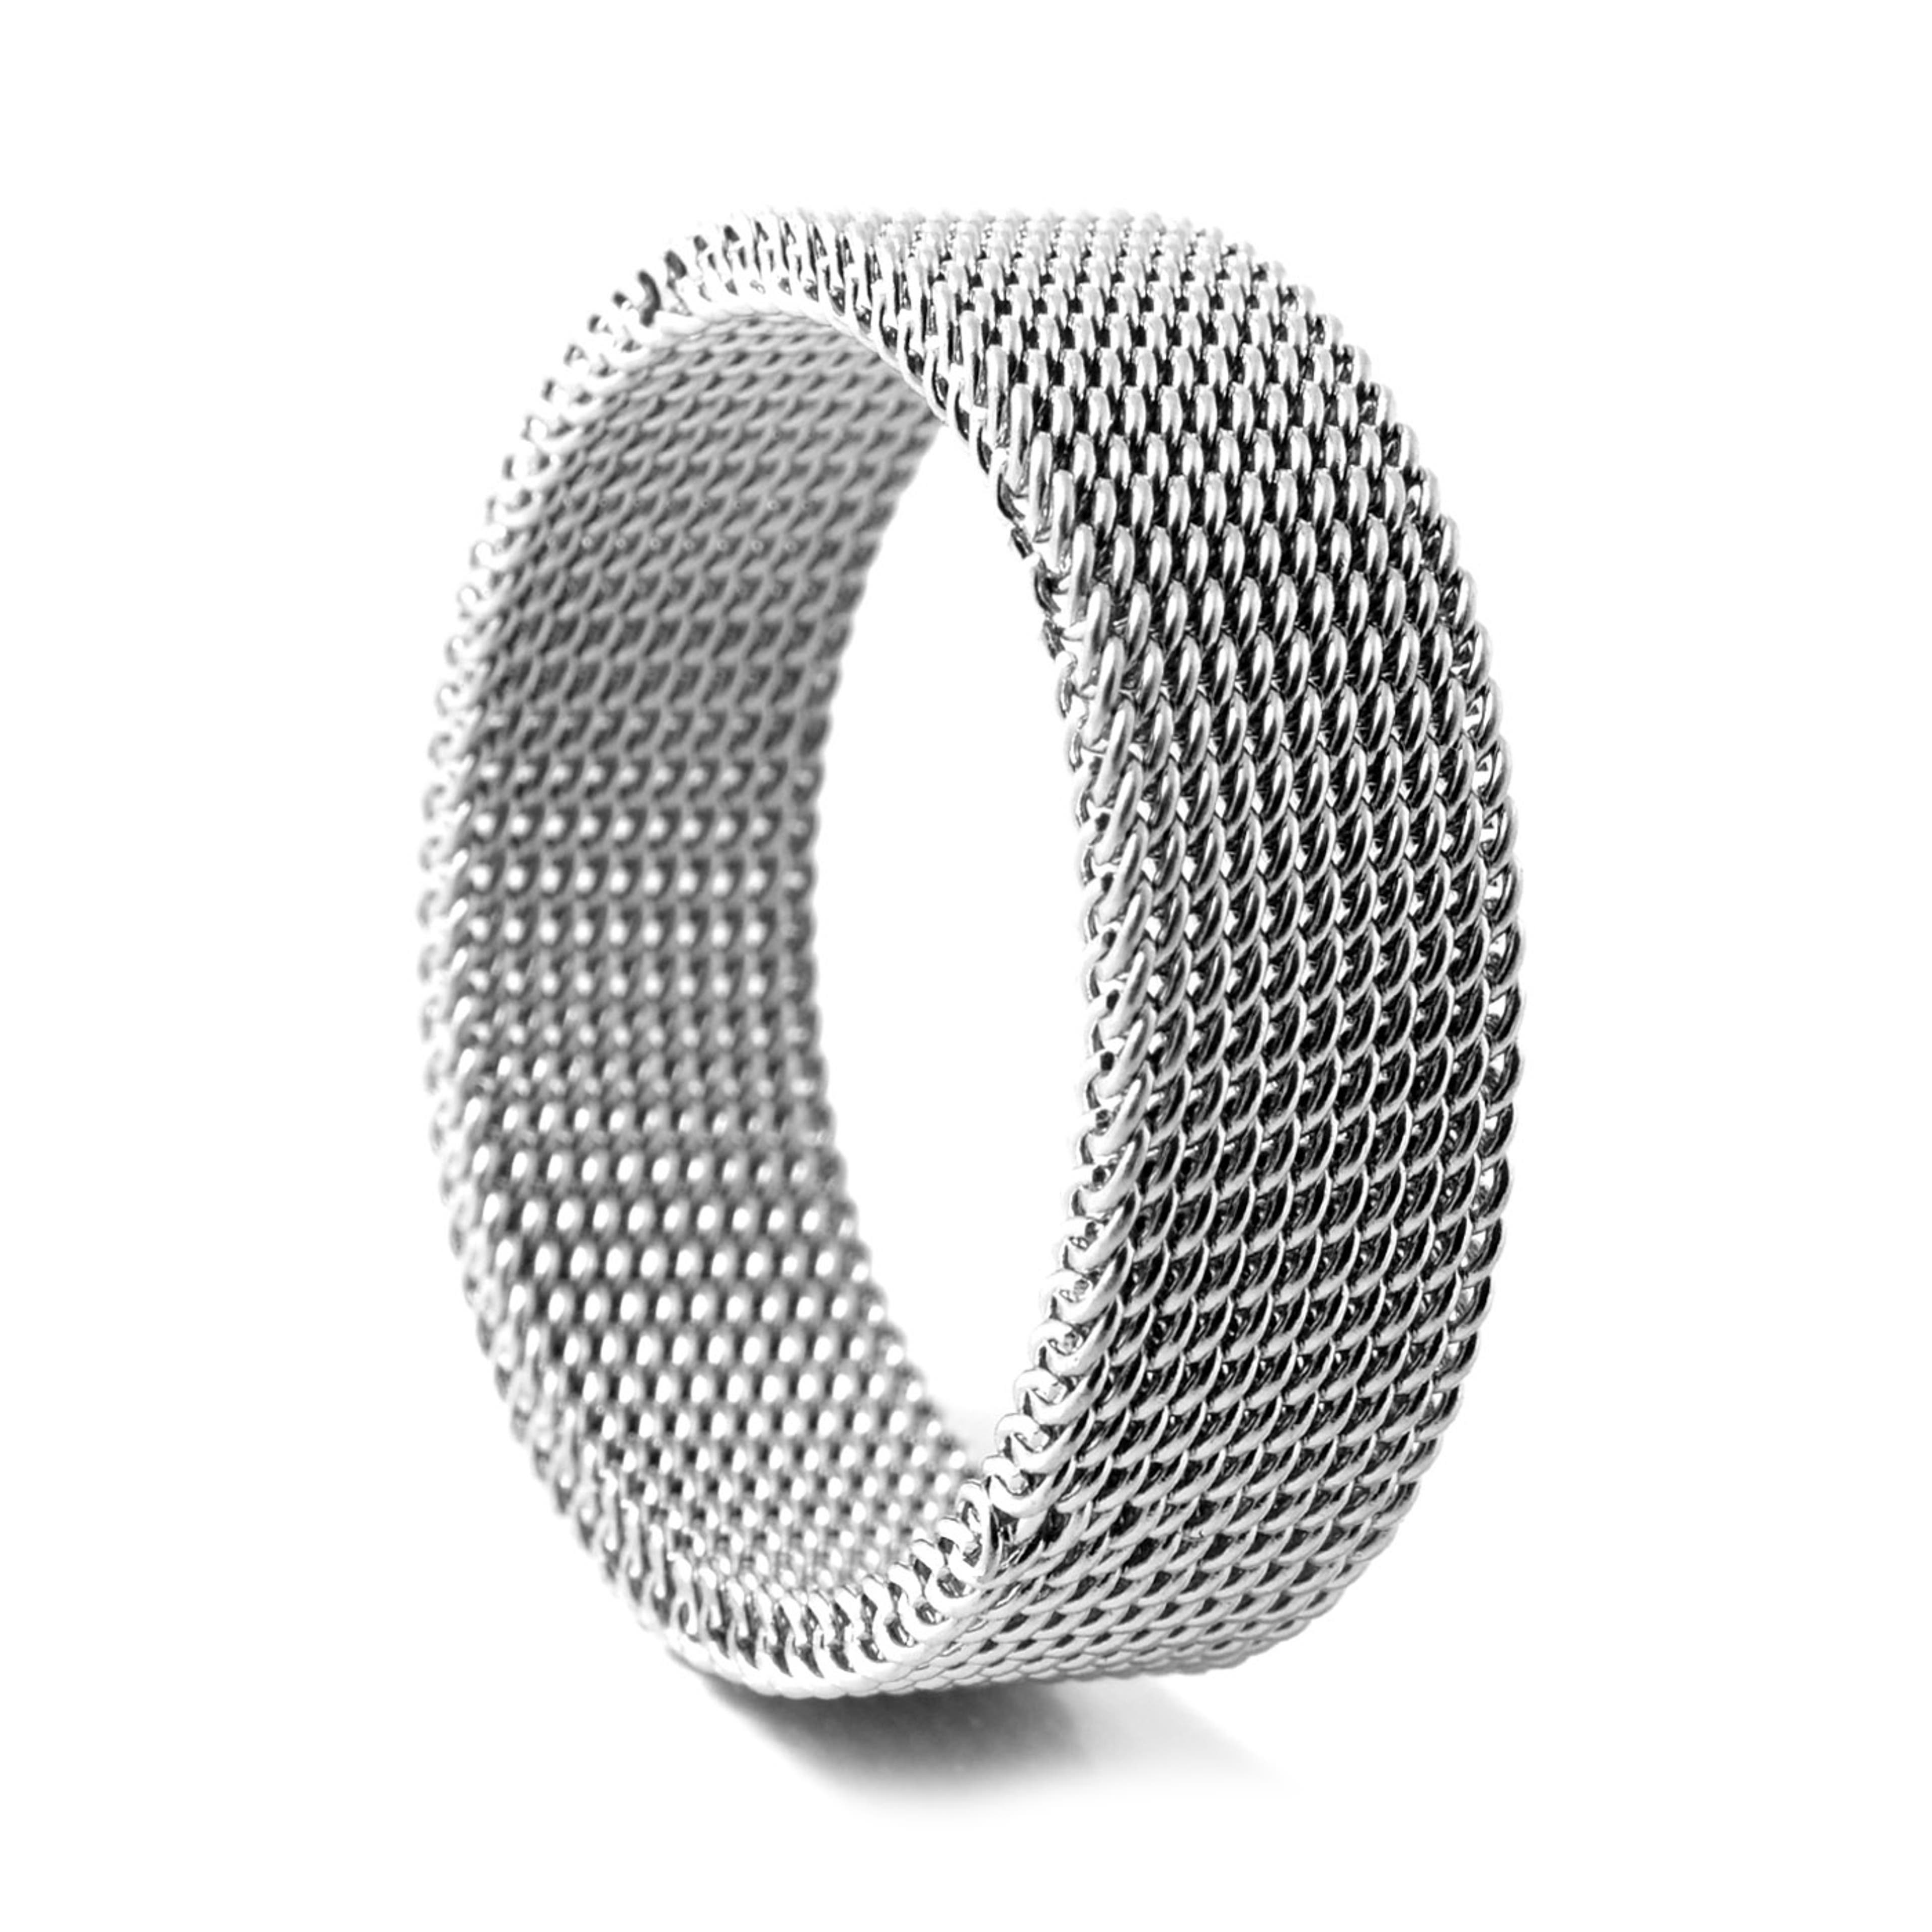 8 mm Silver-Tone Stainless Steel Flexible Chain Ring